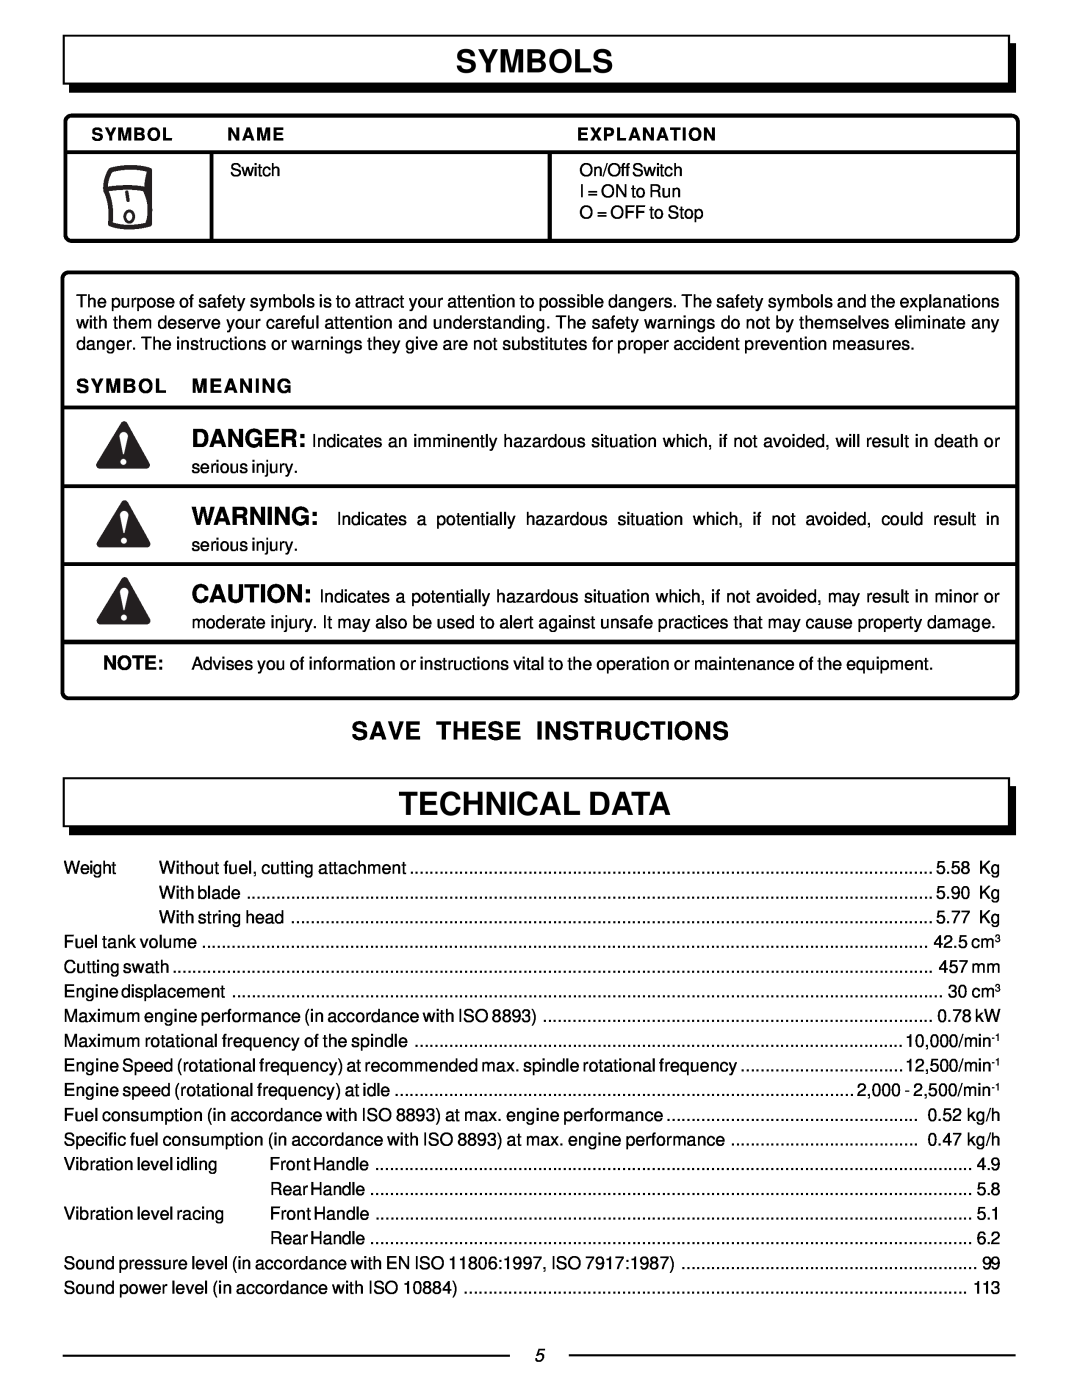 Homelite UT70127 manual Technical Data, Symbols, Save These Instructions, Symbol Meaning, Name, Explanation 